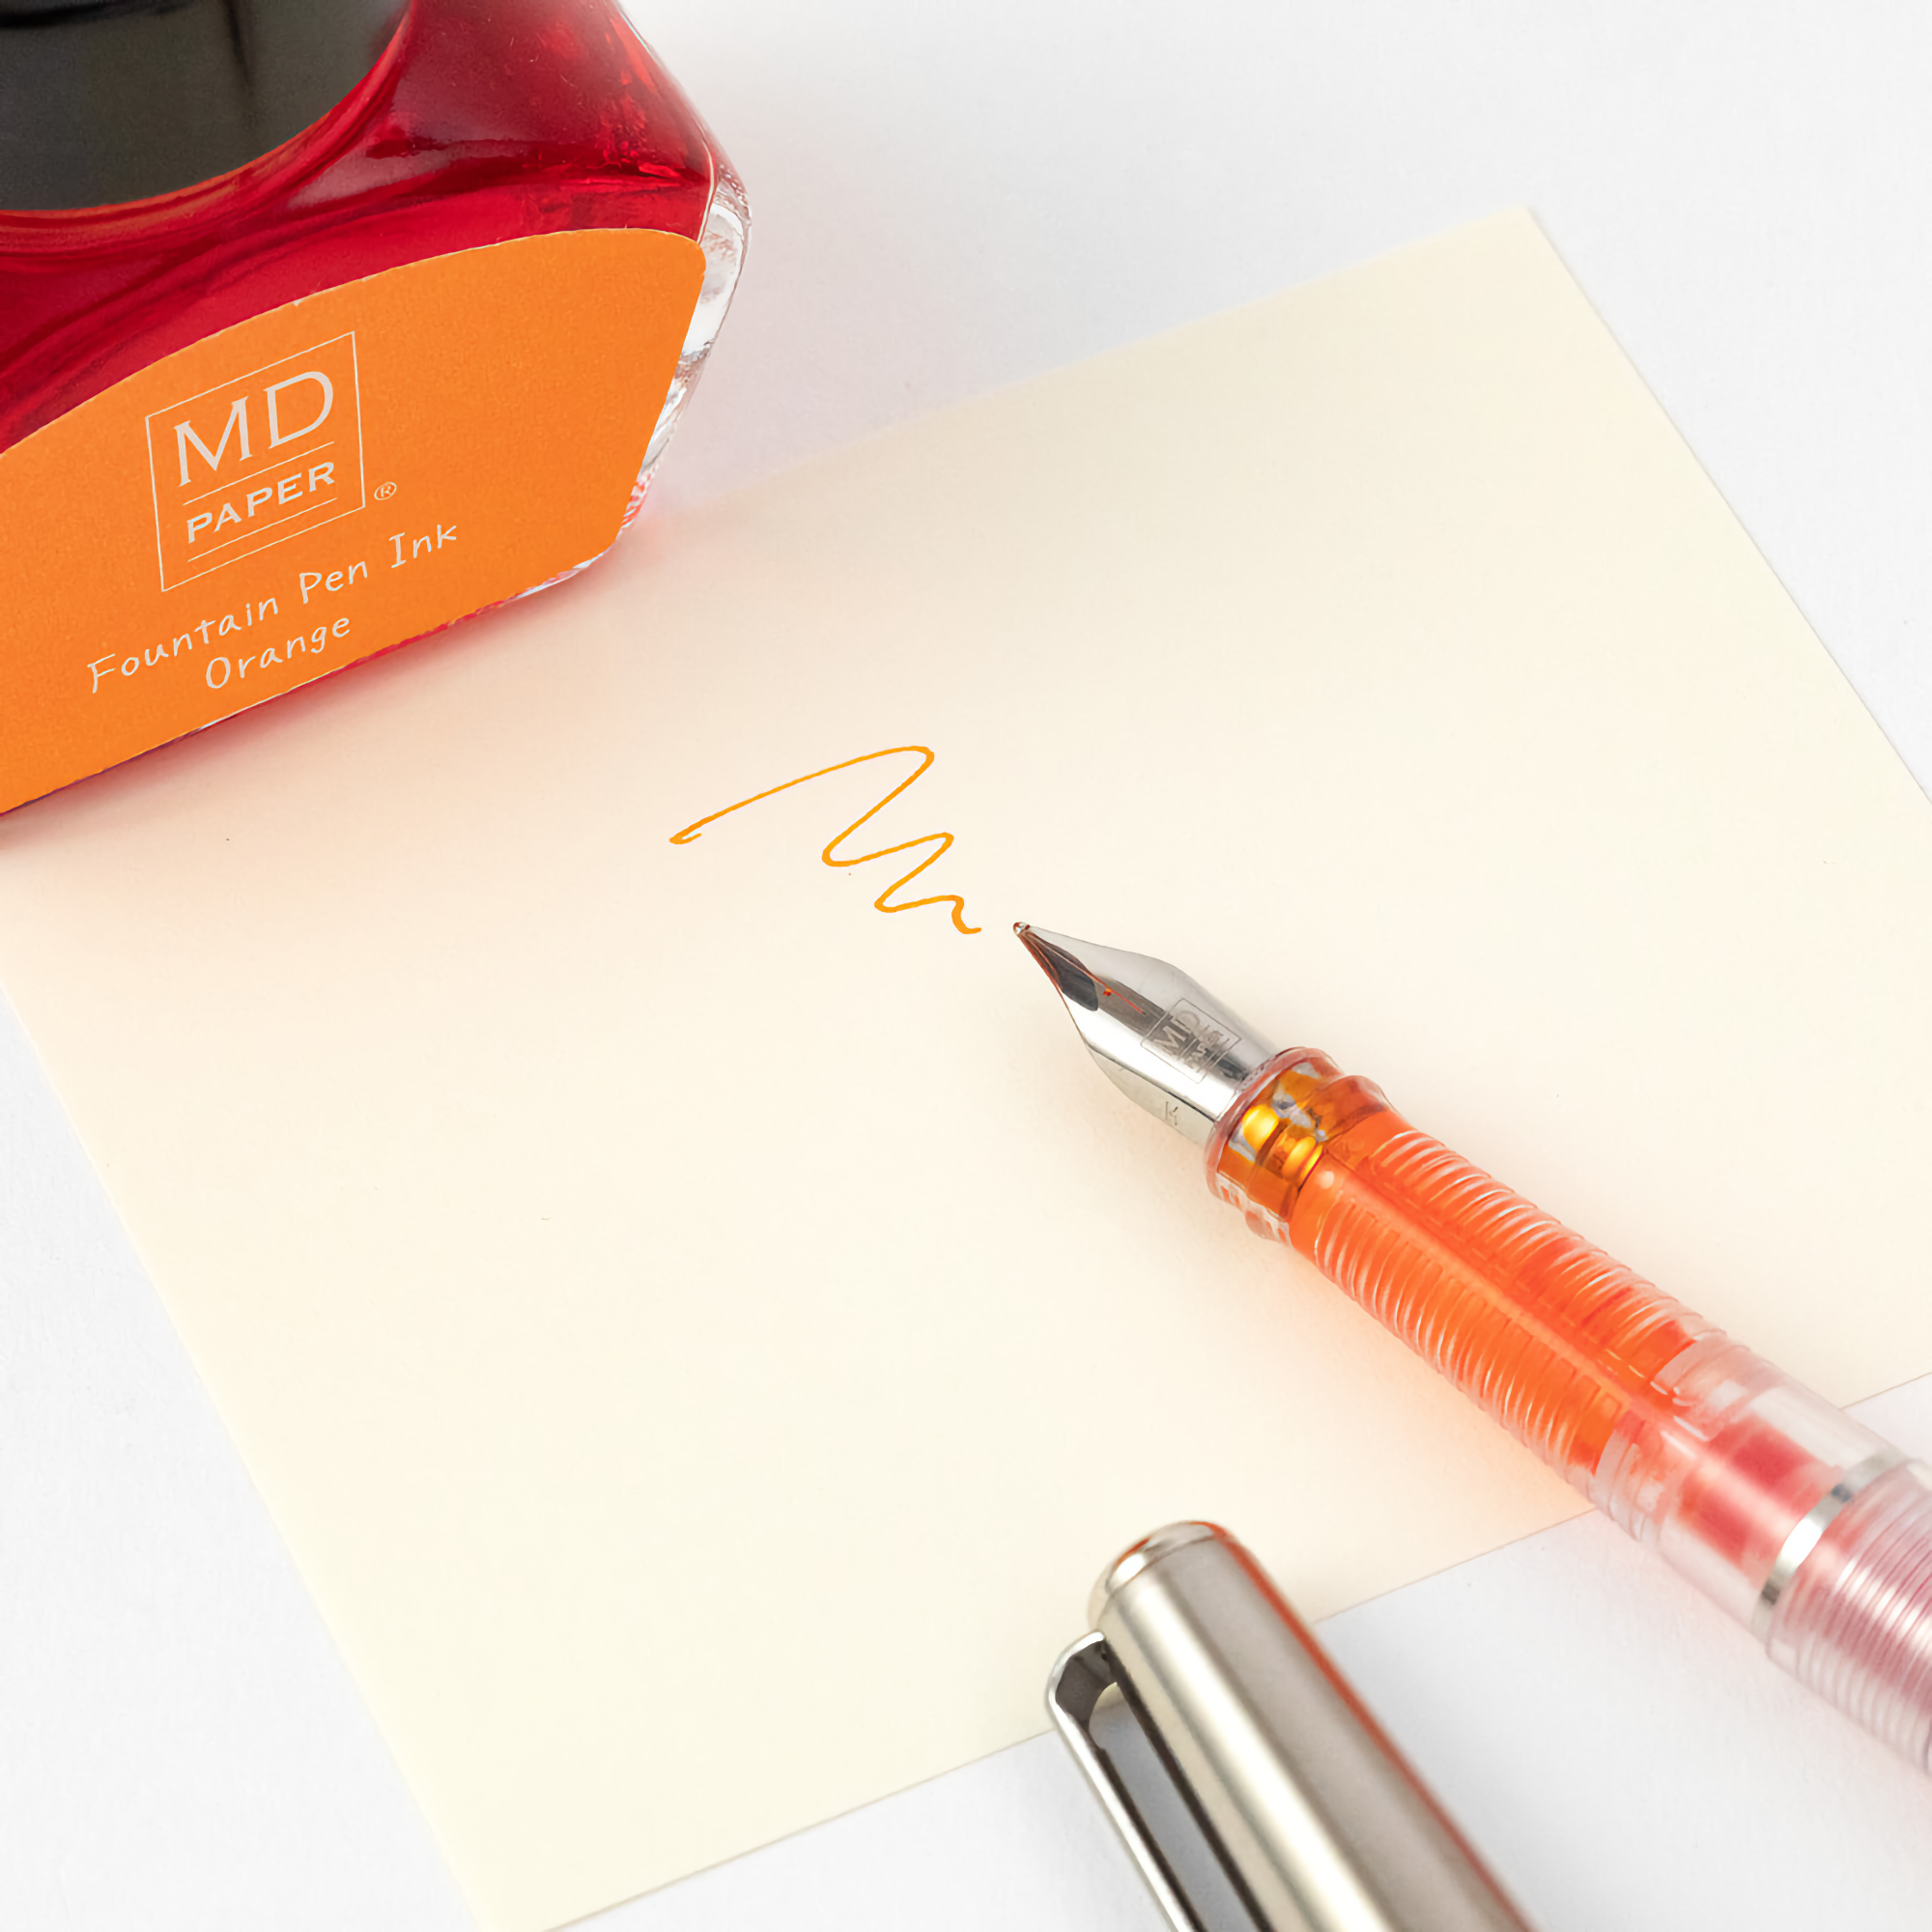 Midori MD Fountain Pen With Bottled Ink Orange [LIMITED EDITION]